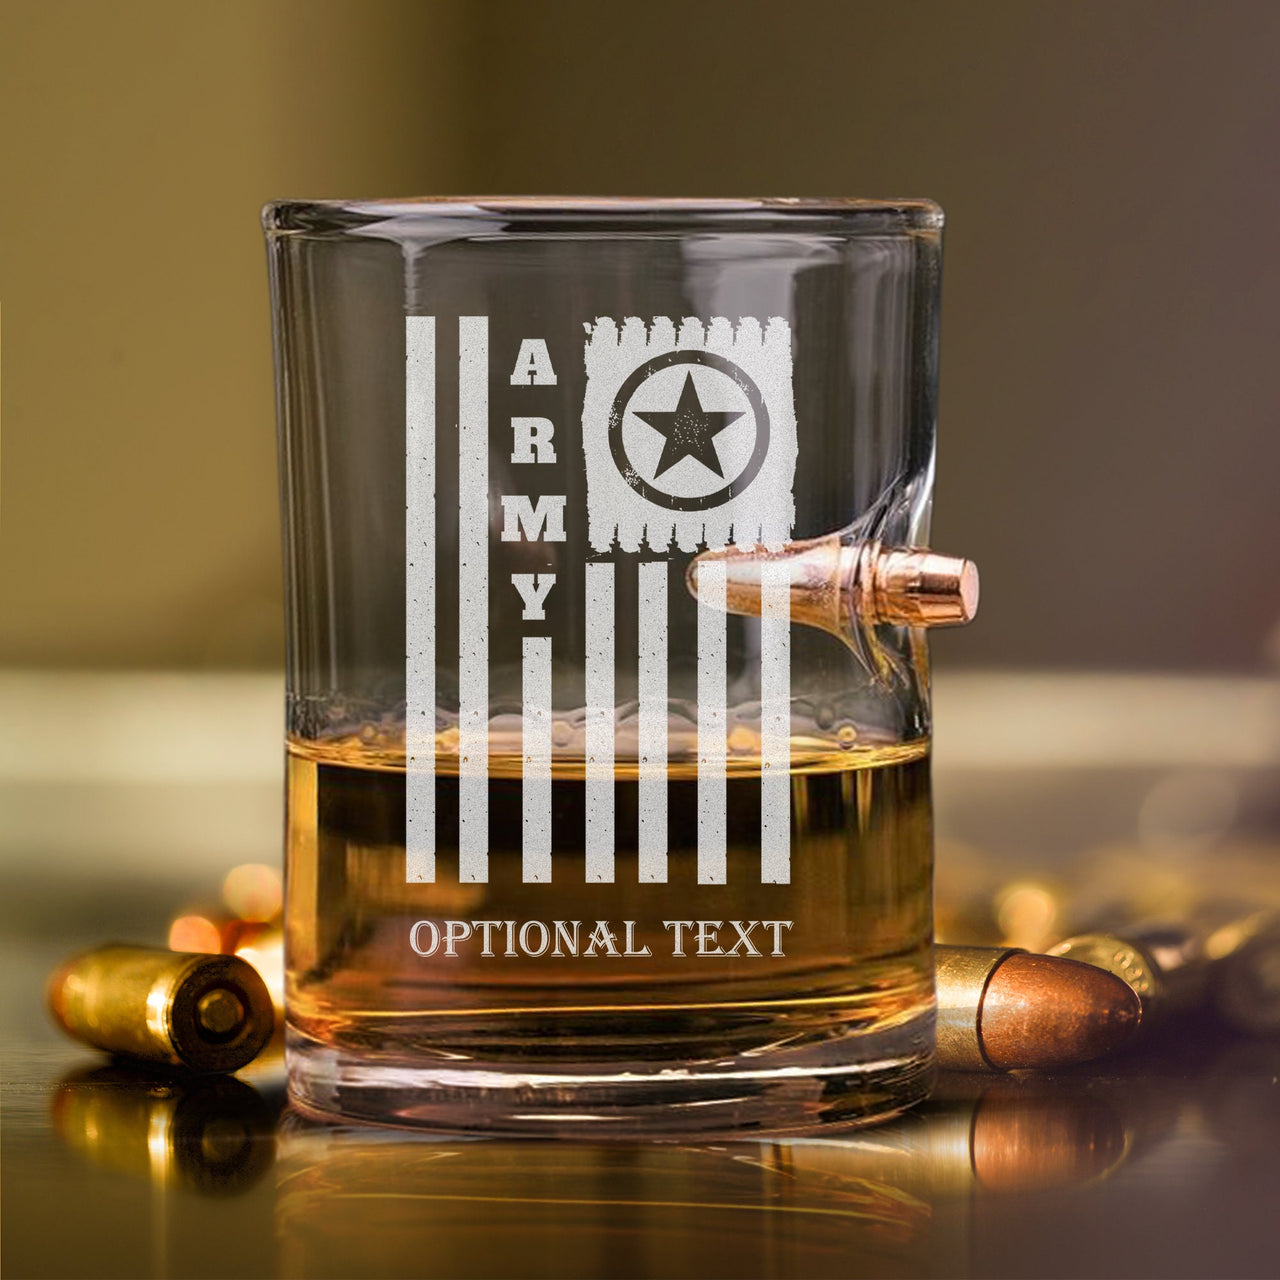 Custom Airforce 10 oz Bullet Glass, American Flag US Airforce Gift Bullet Whiskey Glass, Personalized Engraved Glass Military Bullet Glass